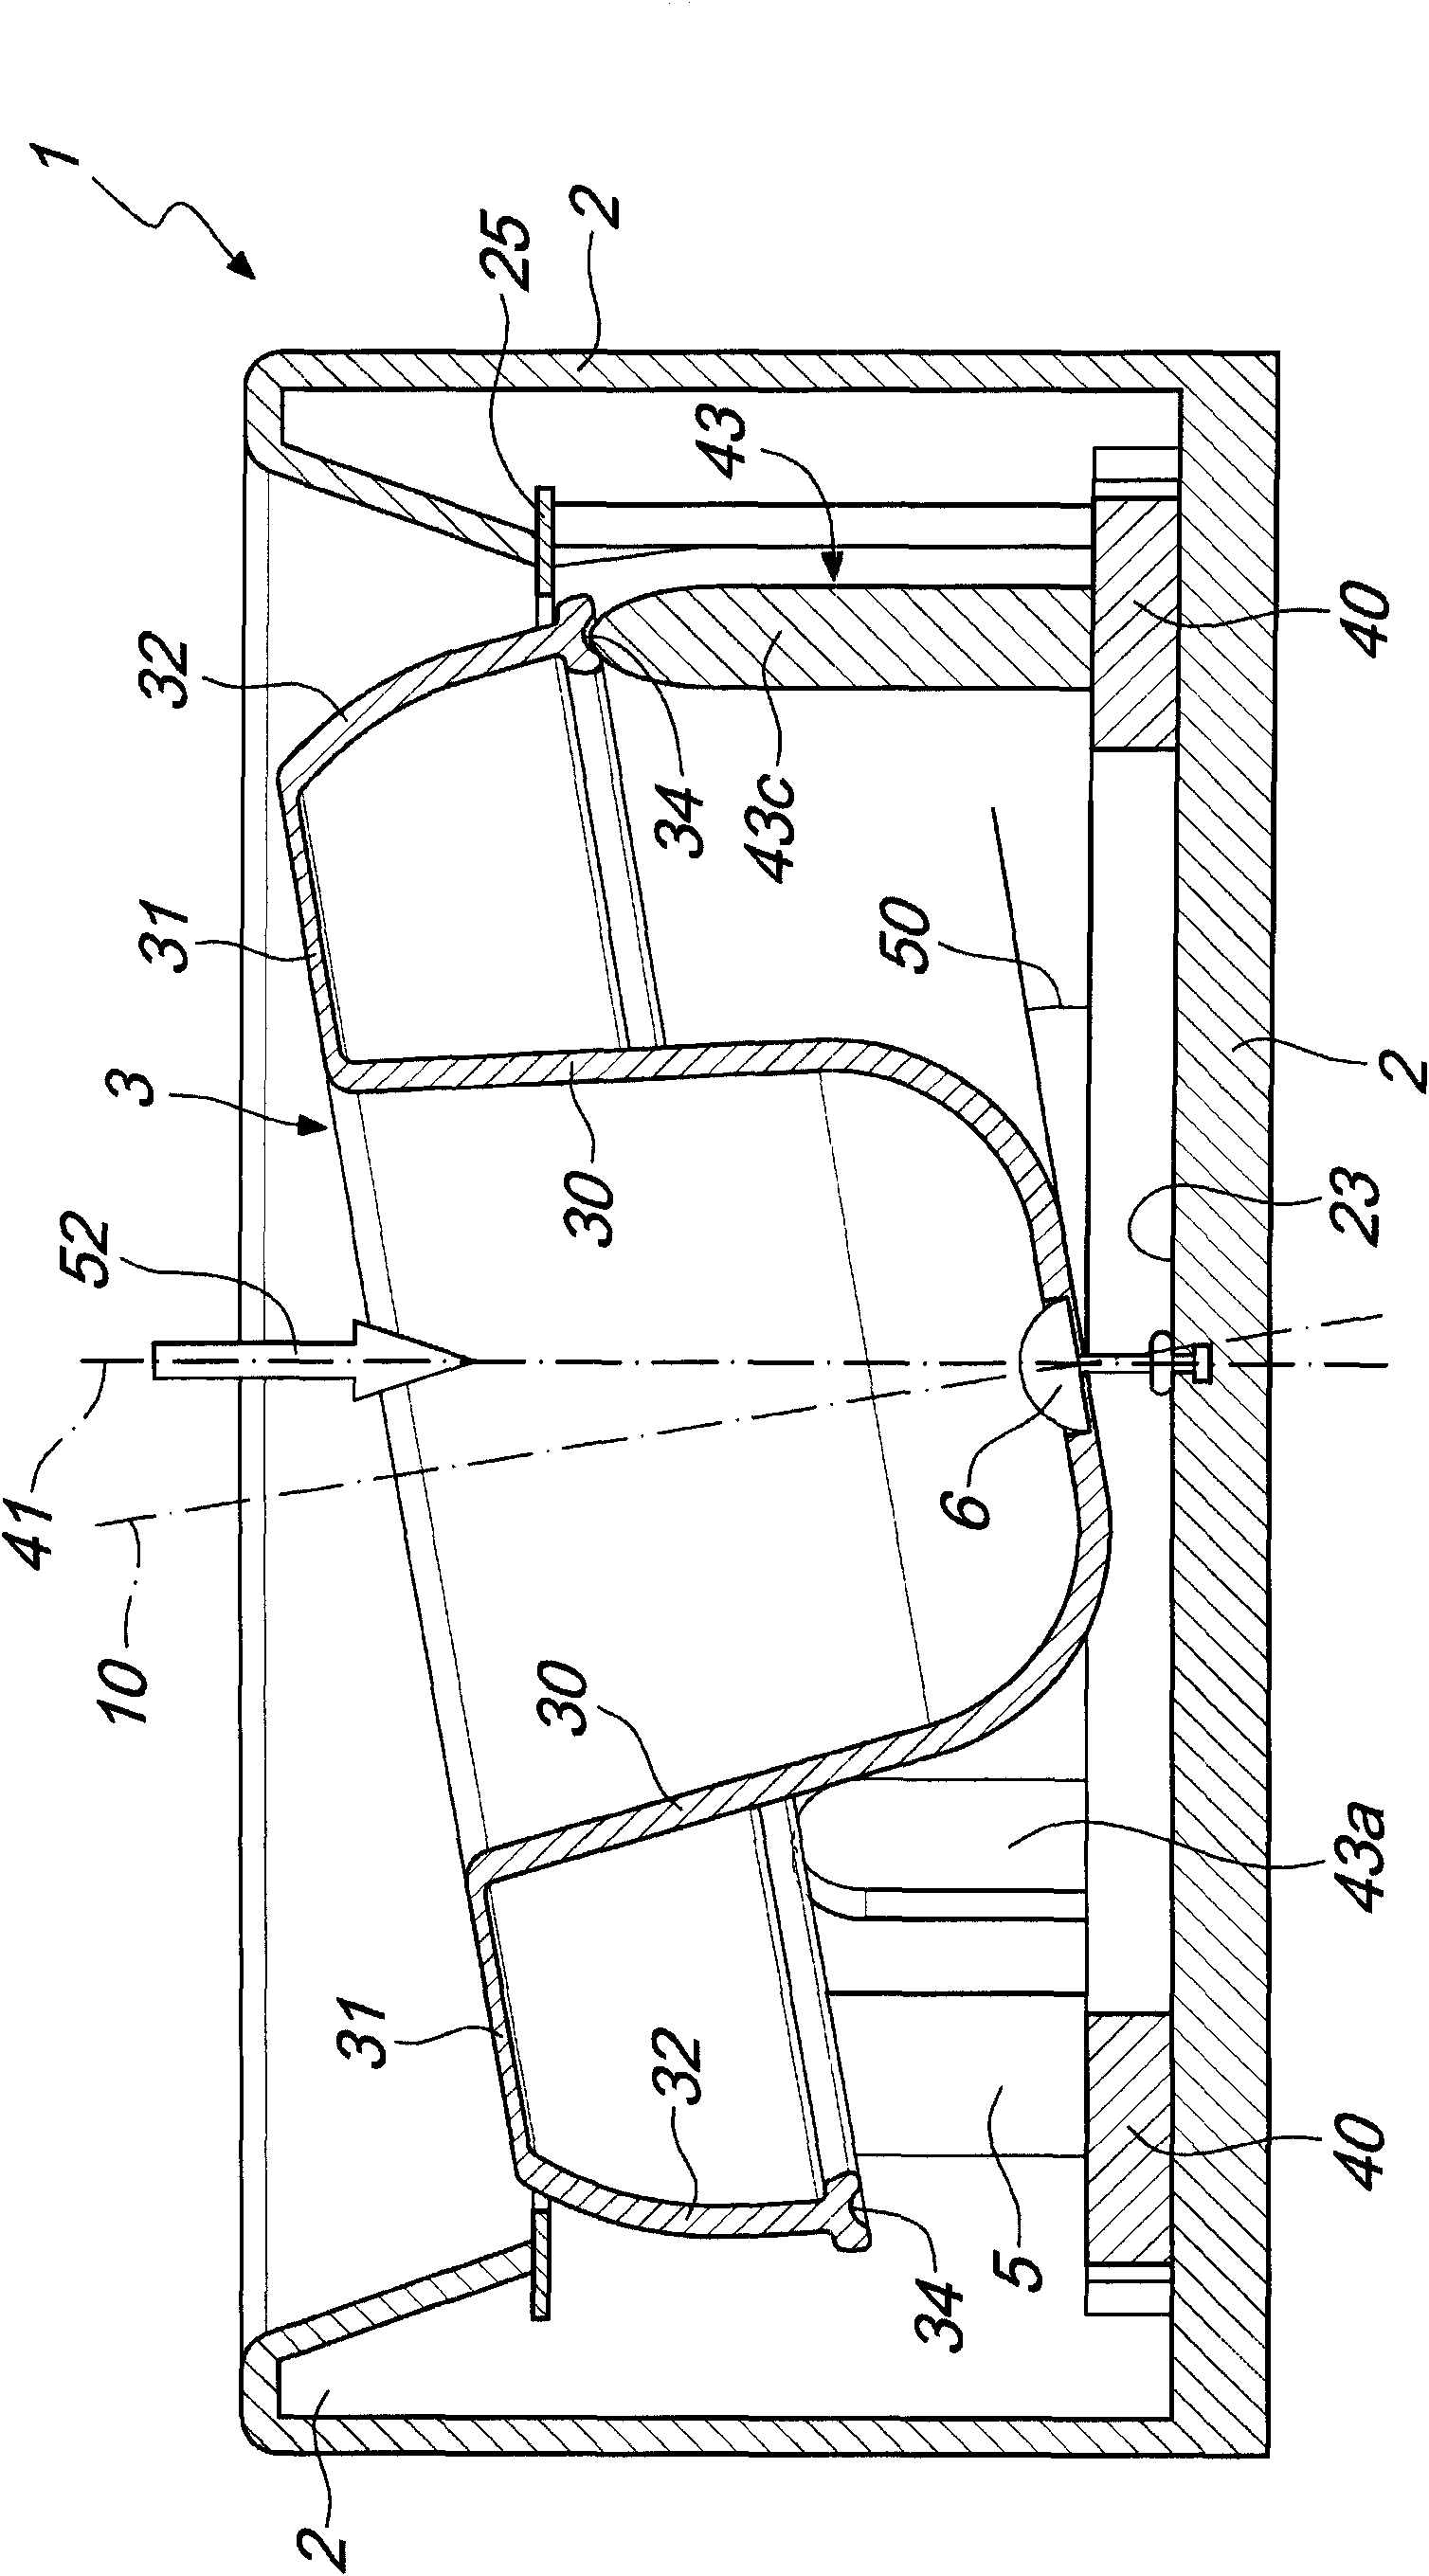 Device for winding watches, in particular self-winding watches